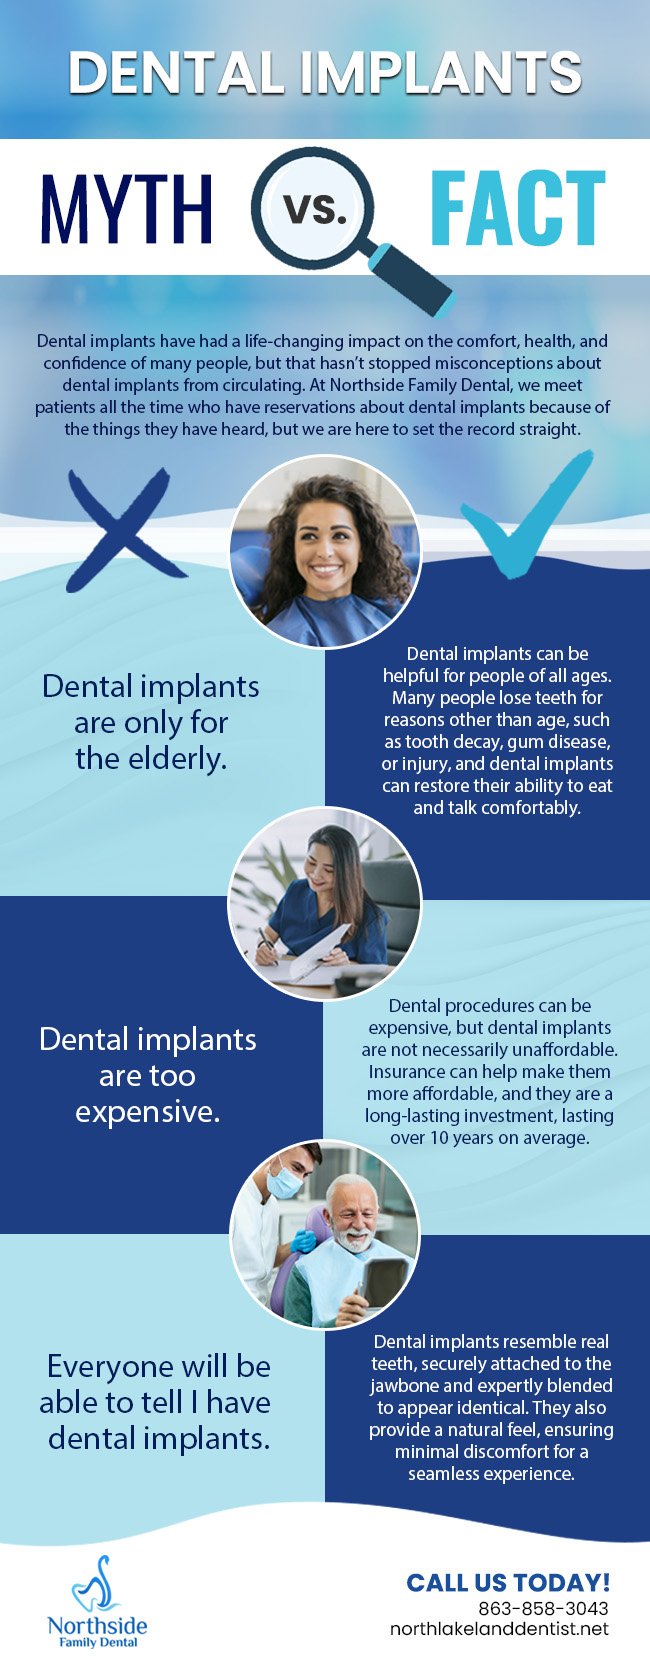 Common Myths About Dental Implants